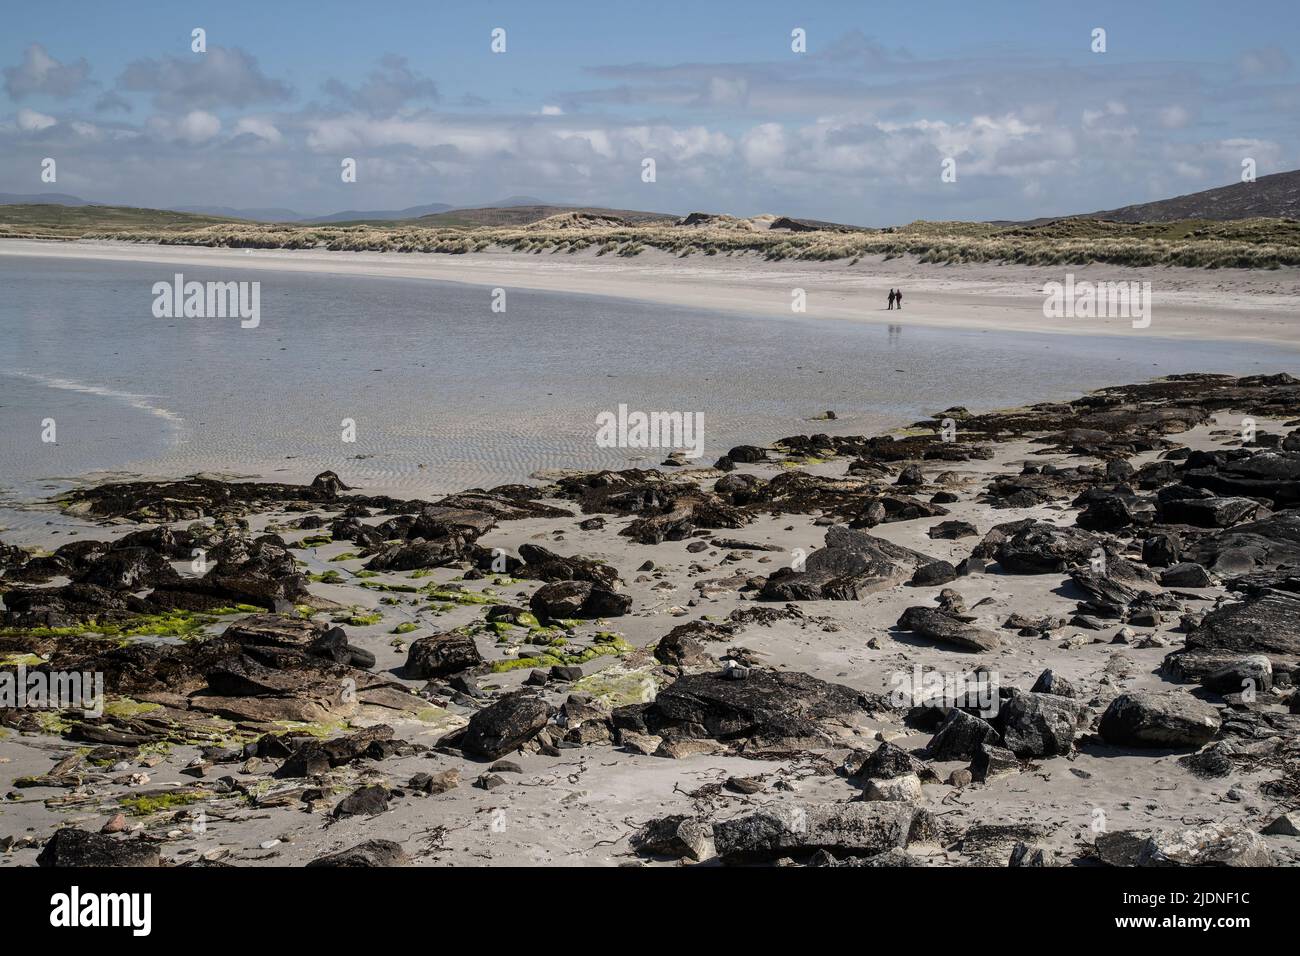 A couple in the distance walking beyond the rocks and seaweed on the white sands of Clachan Sands In North Uist, Outer Hebrides Stock Photo